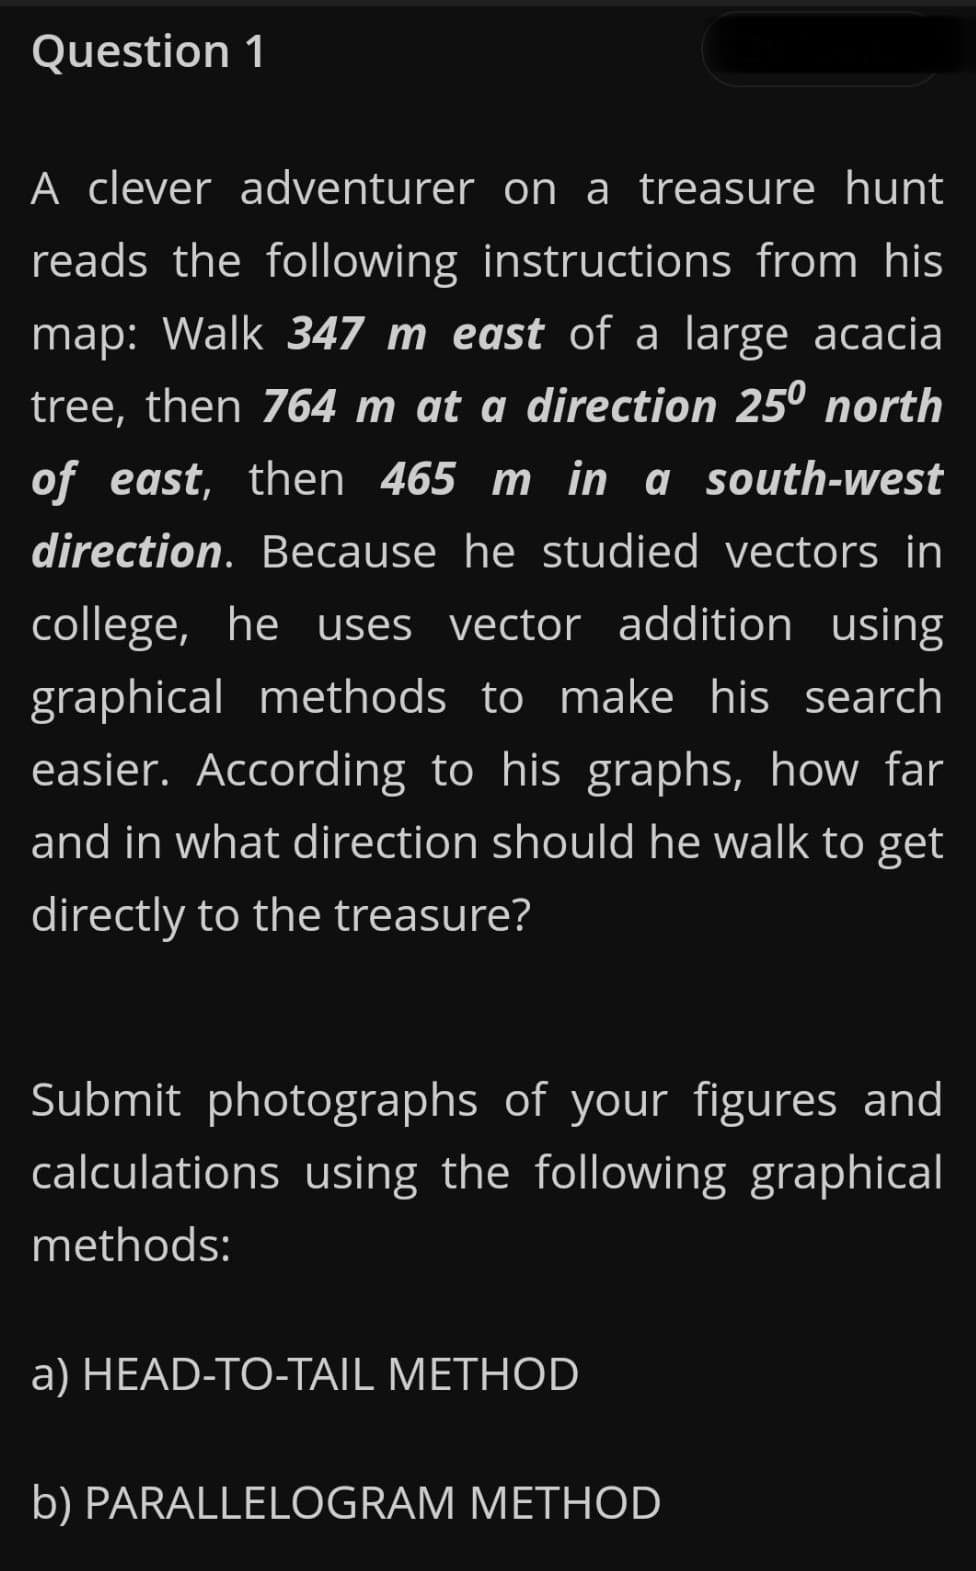 Question 1
A clever adventurer on a treasure hunt
reads the following instructions from his
map: Walk 347 m east of a large acacia
tree, then 764 m at a direction 25º north
of east, then 465 m in a south-west
direction. Because he studied vectors in
college, he uses vector addition using
graphical methods to make his search
easier. According to his graphs, how far
and in what direction should he walk to get
directly to the treasure?
Submit photographs of your figures and
calculations using the following graphical
methods:
a) HEAD-TO-TAIL METHOD
b) PARALLELOGRAM METHOD
